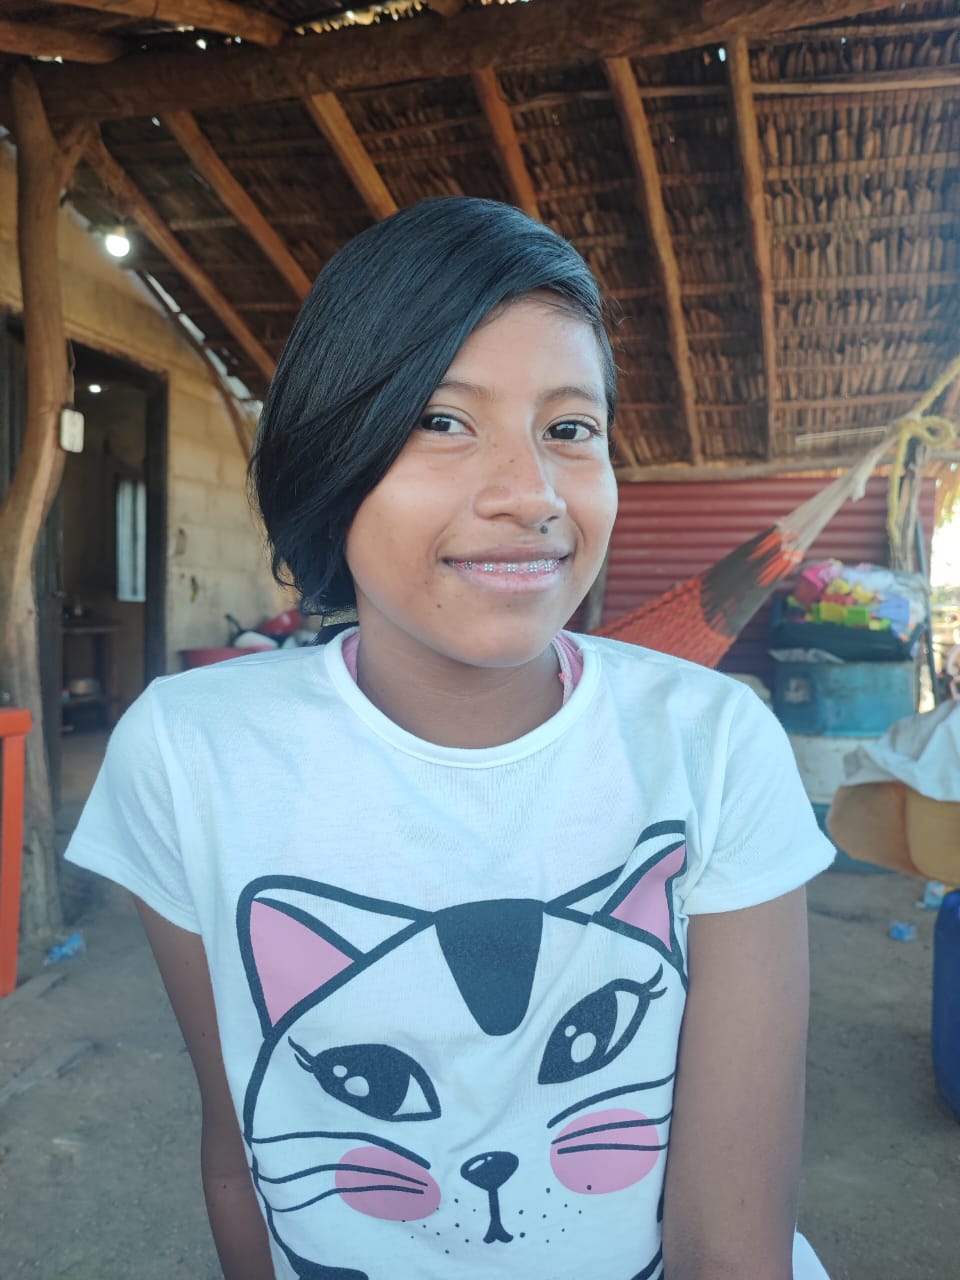 Elyañis a wayúu girl recently enrolled in ethnic schools to preserving cultural traditions through quality education